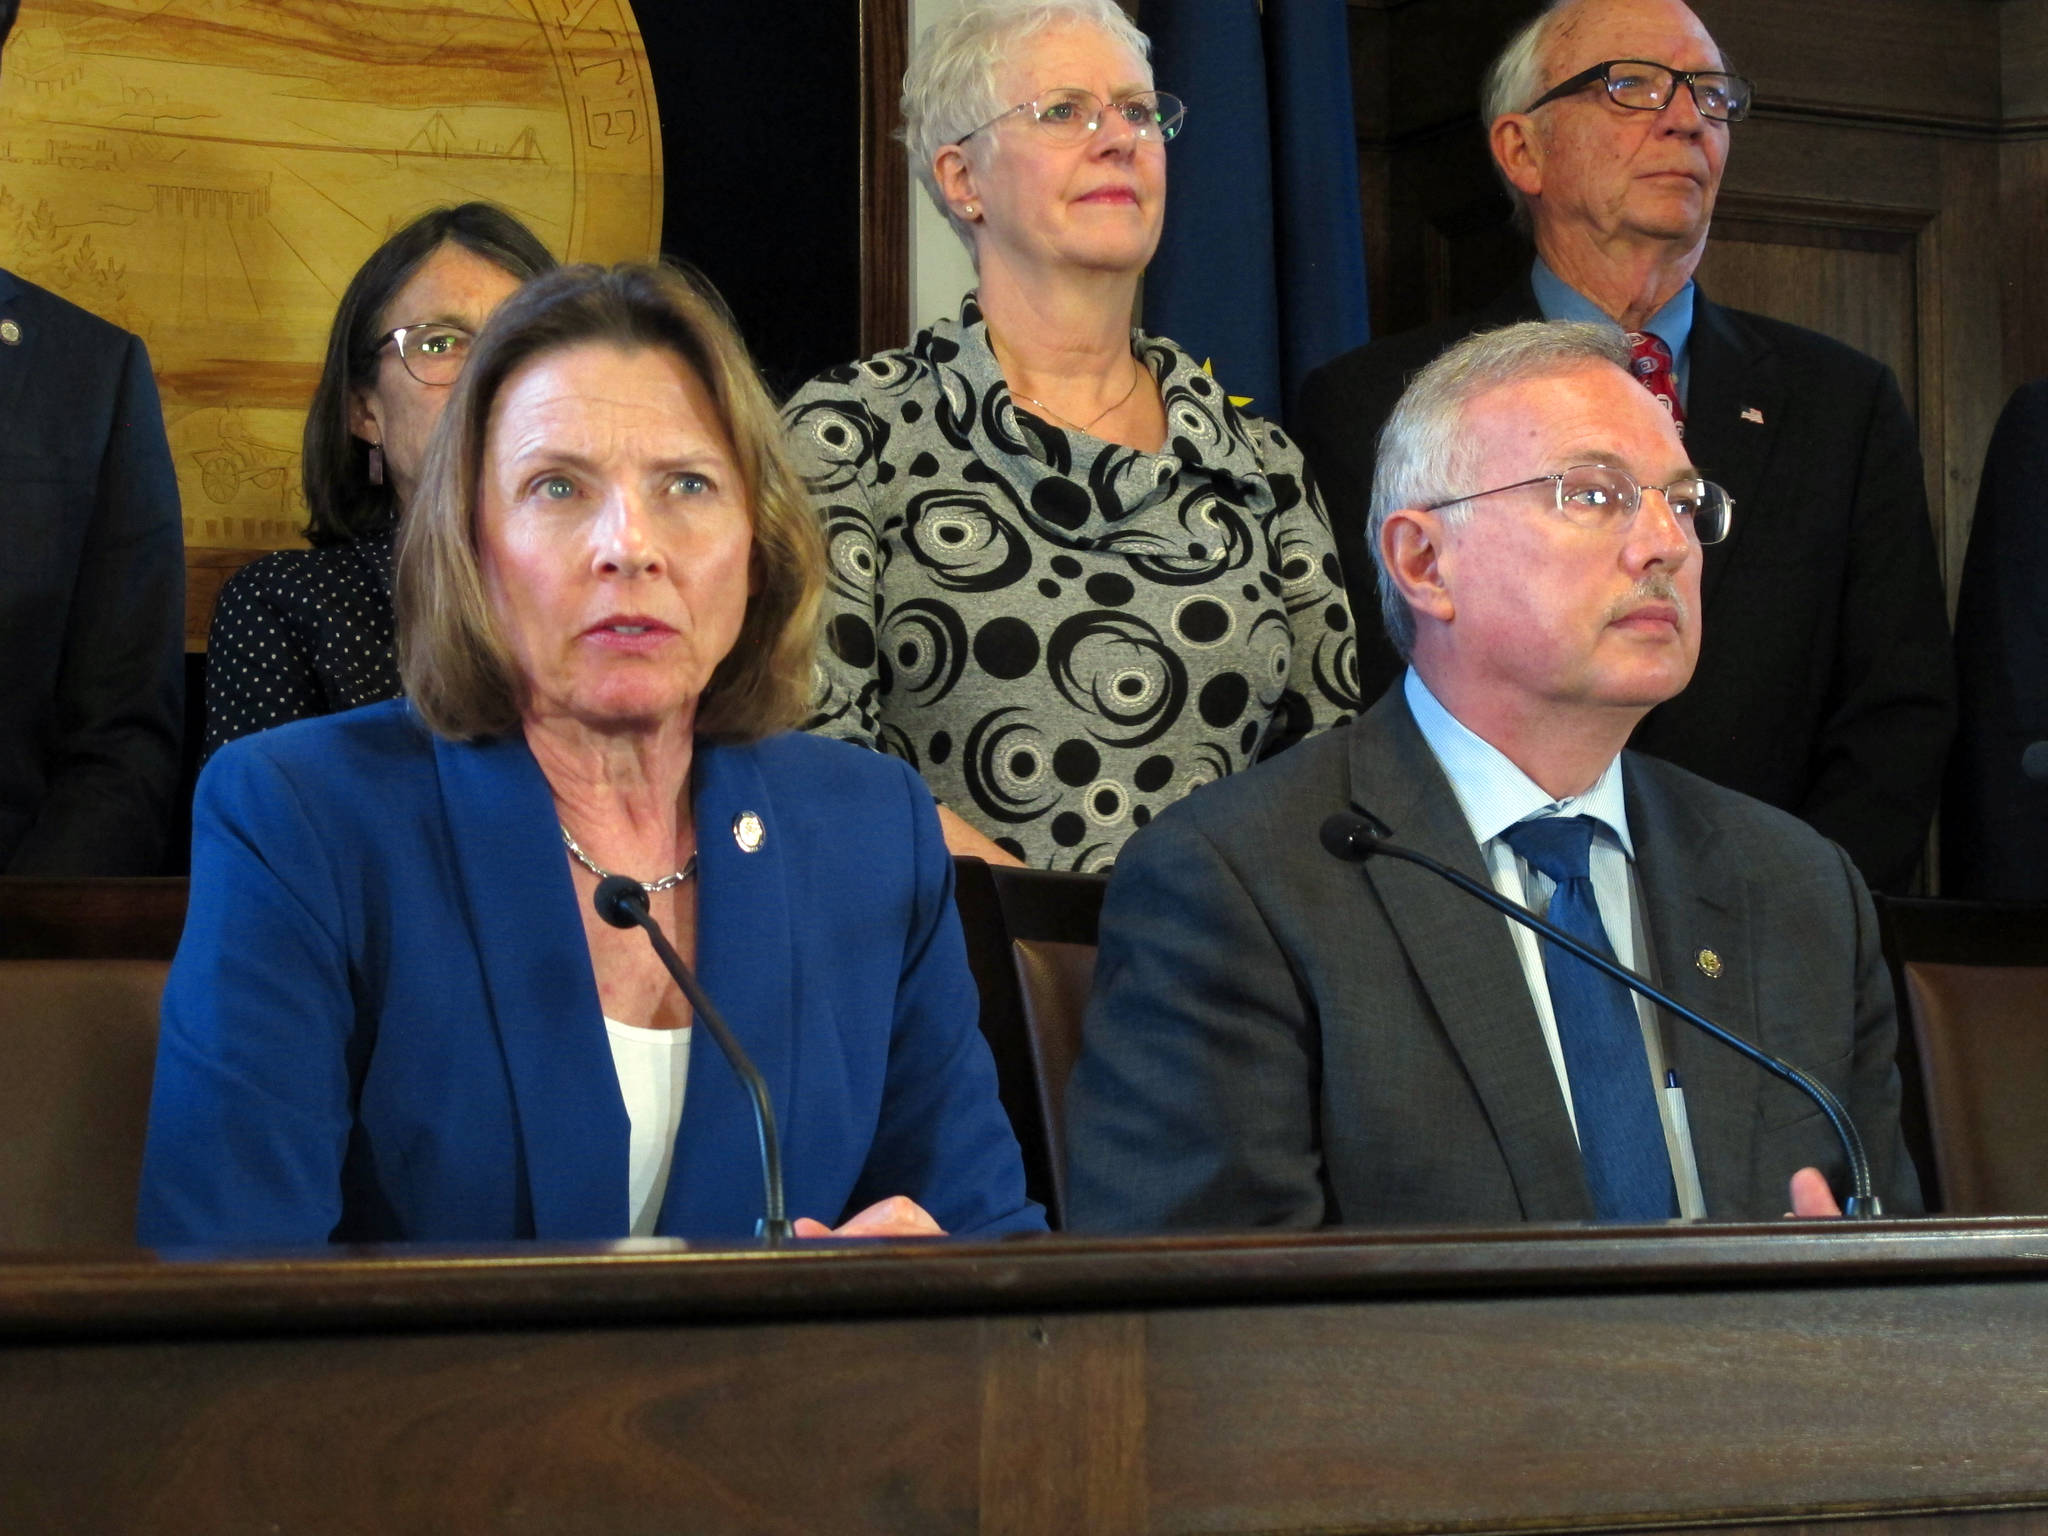 Alaska Senate President Cathy Giessel, seated left, speaks during a news conference on education funding held by state House and Senate leadership on Tuesday, May 28, 2019, in Juneau, Alaska. Seated beside her is House Speaker Bryce Edgmon. (AP Photo/Becky Bohrer)